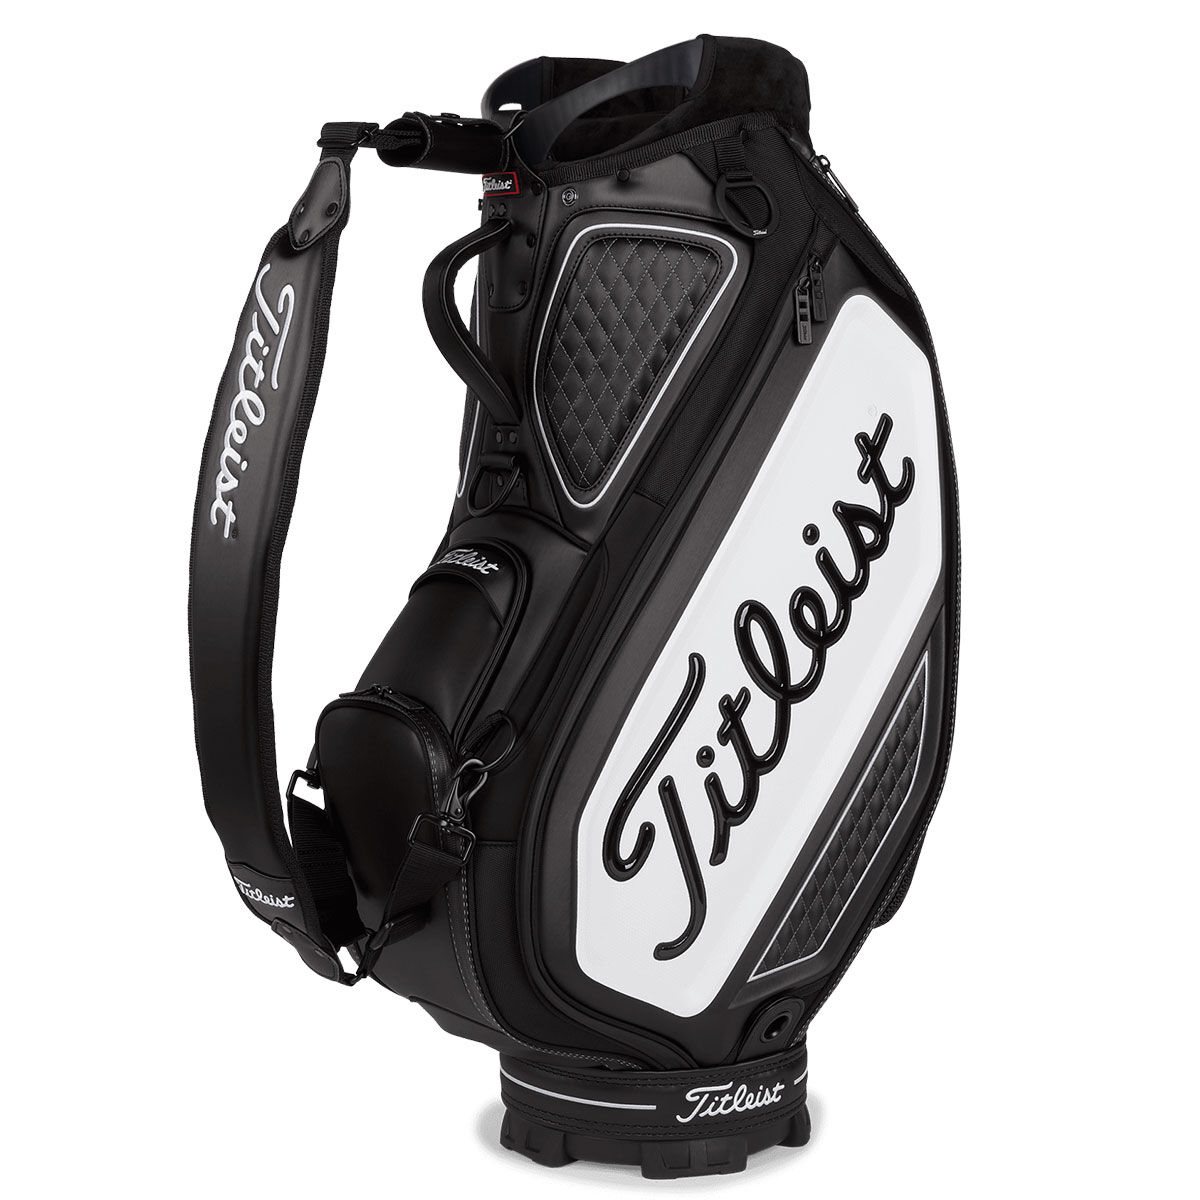 Titleist Official Tour Golf Bag Golf Golf Bag in Black and White